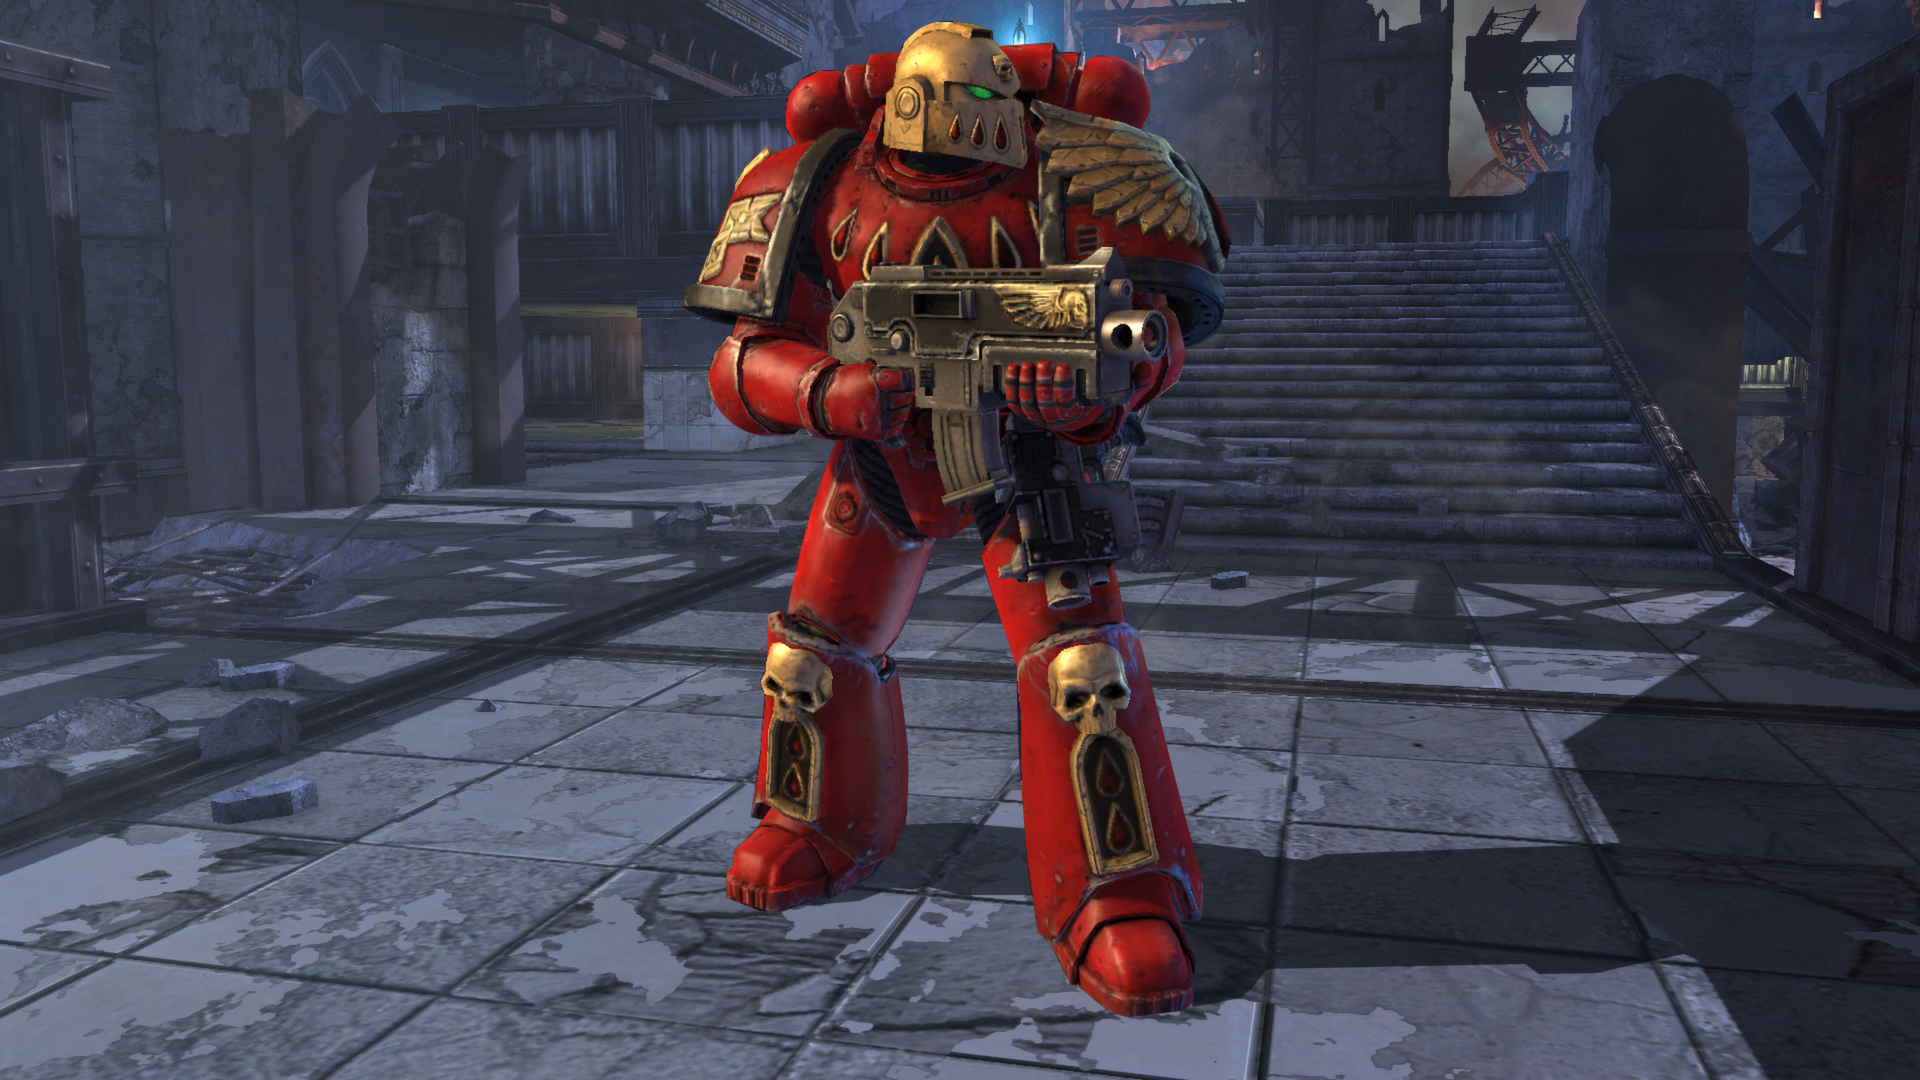 warhammer 40k skins for company of heroes 2